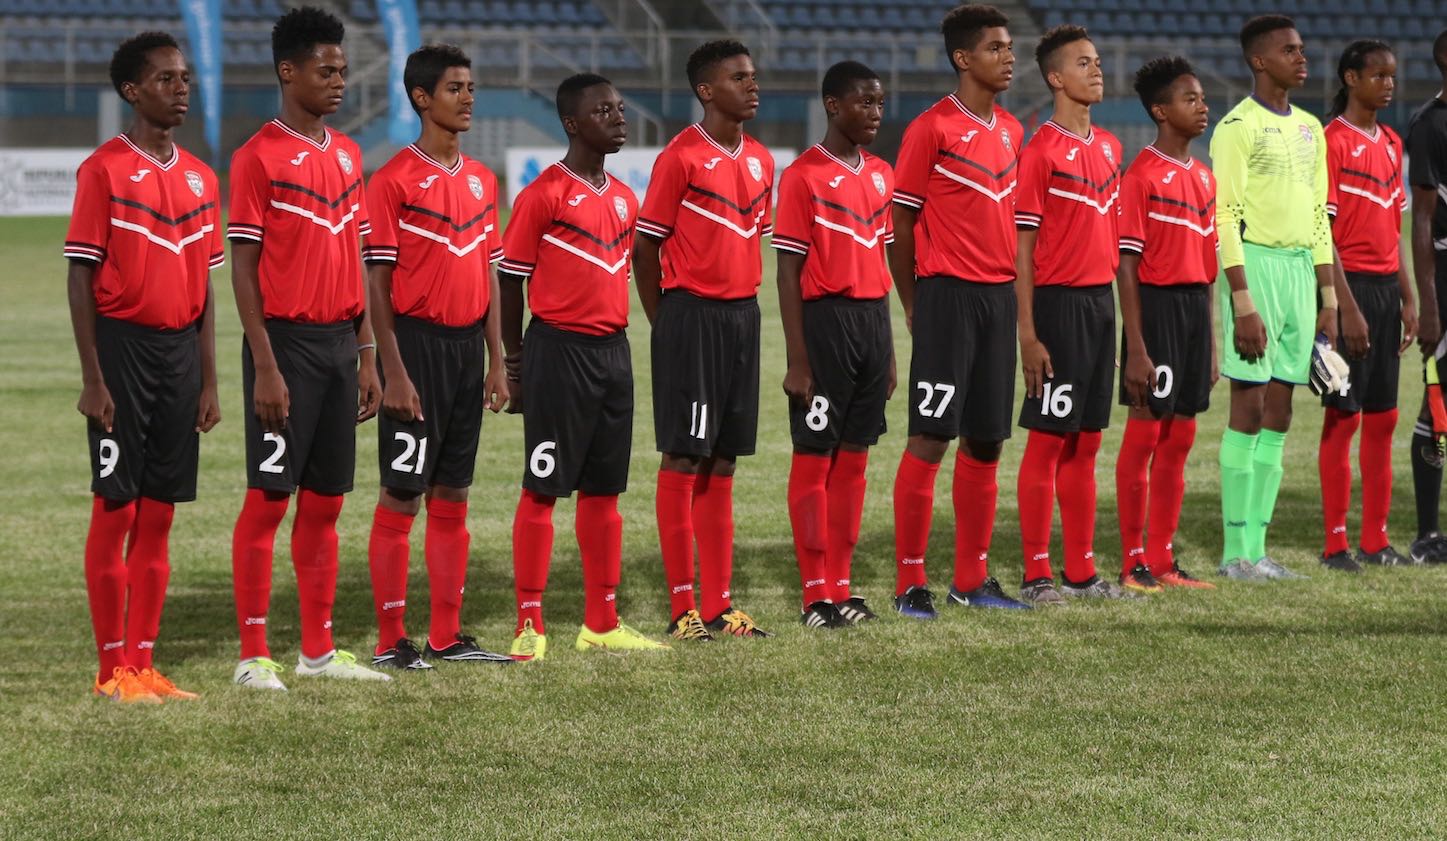 Latapy looks to widen Under 15 pool.